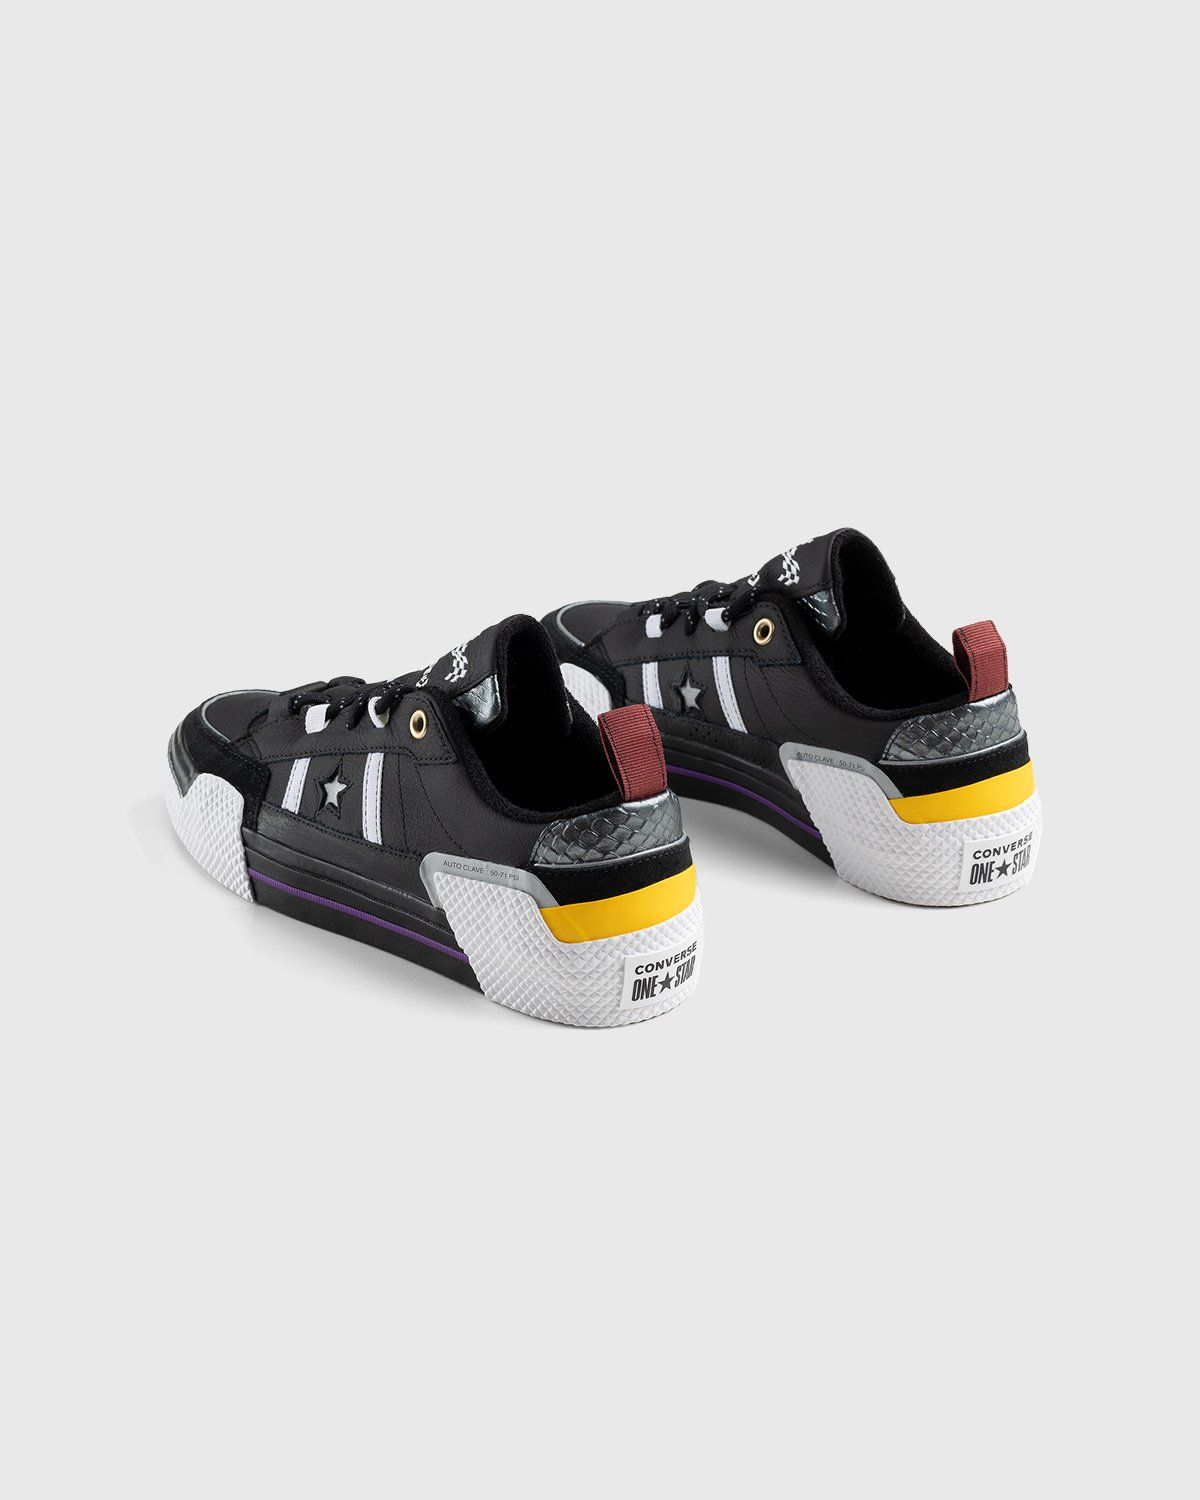 Converse x IBN Japser – One Star Ox Black/White/Spectra Yellow - Sneakers - Black - Image 3